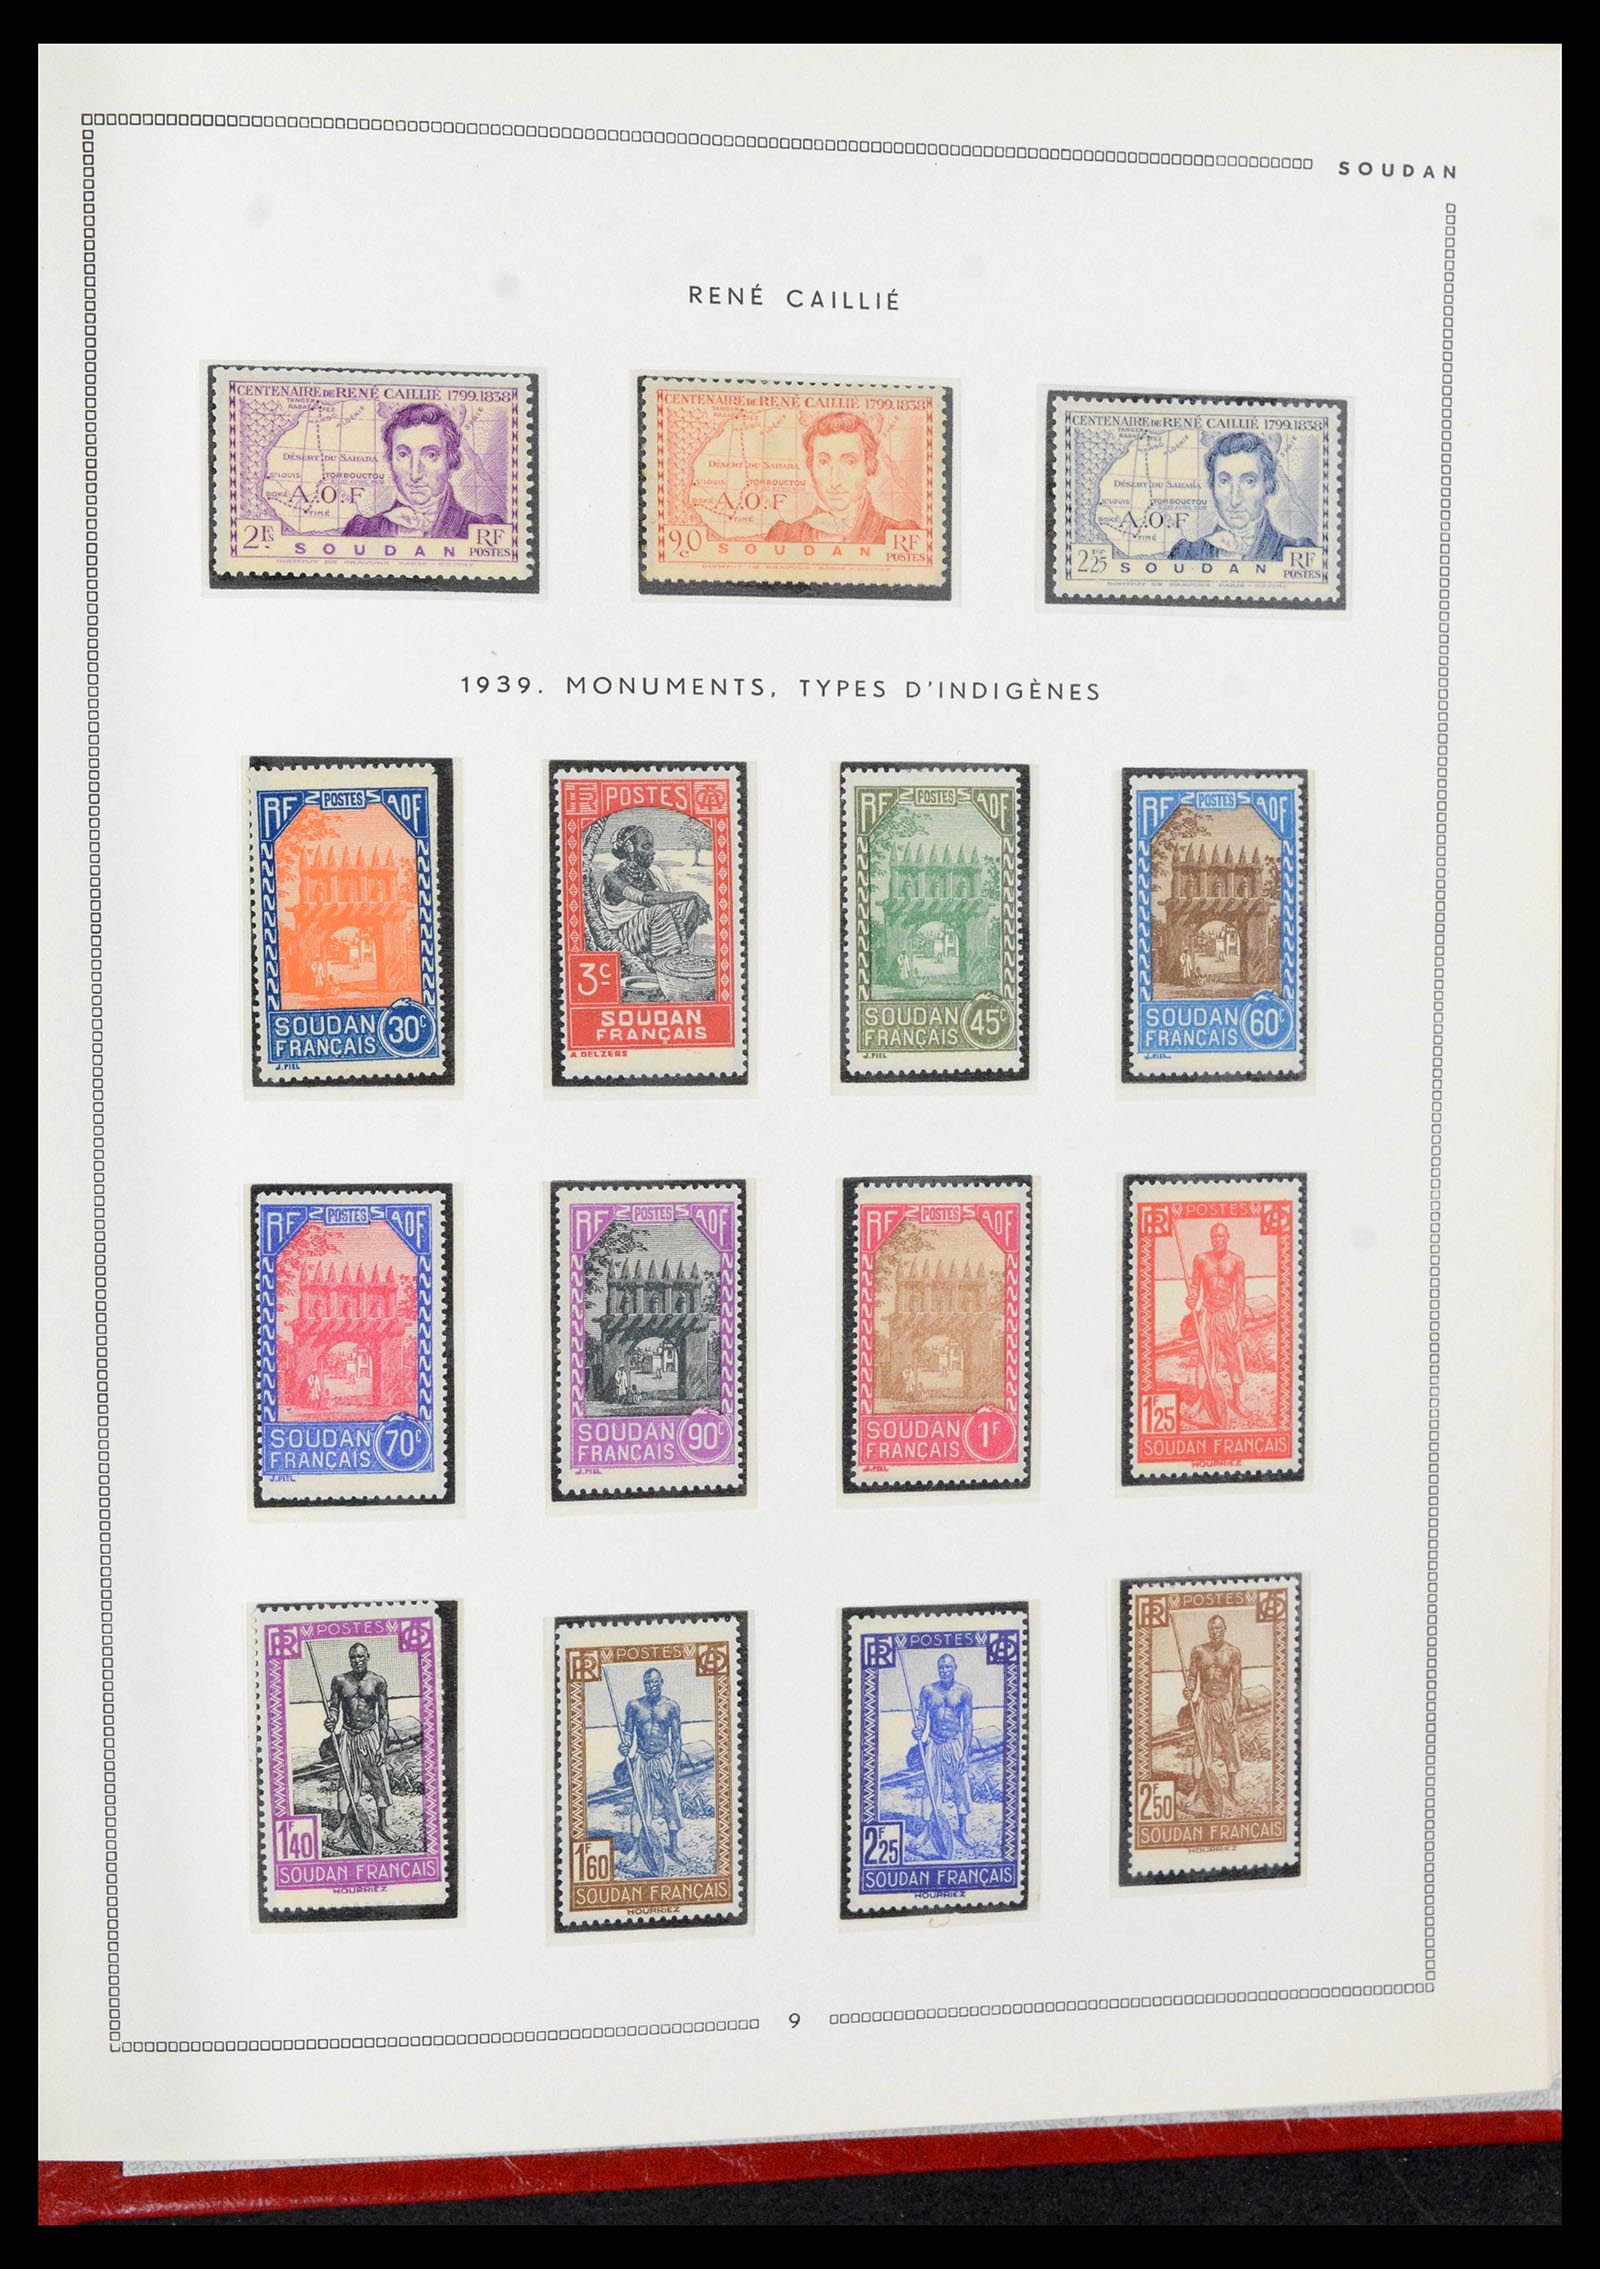 38385 0097 - Stamp collection 38385 French Colonies supercollection 1859-1975.